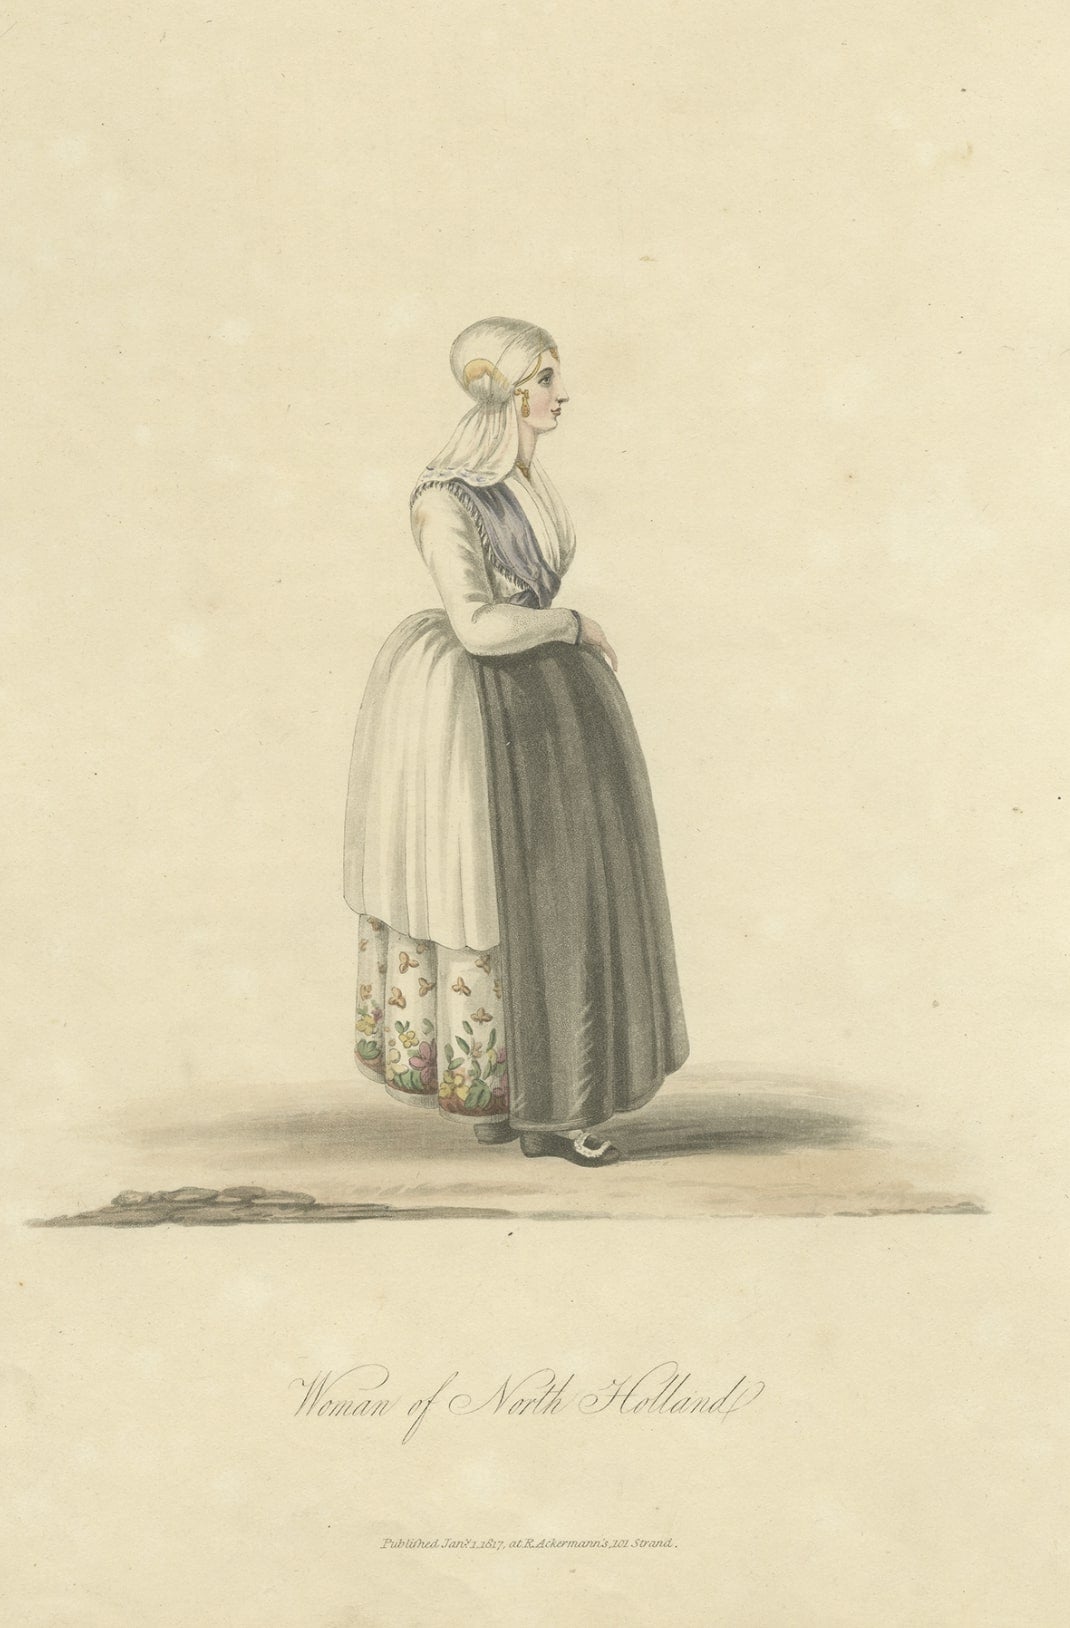 Antique costume print titled 'Woman of North Holland'. Old costume print depicting a woman of the Dutch province 'Noord-Holland'. This print originates from 'The Costume of the Netherlands displayed in thirty coloured engravings'. 

Artists and